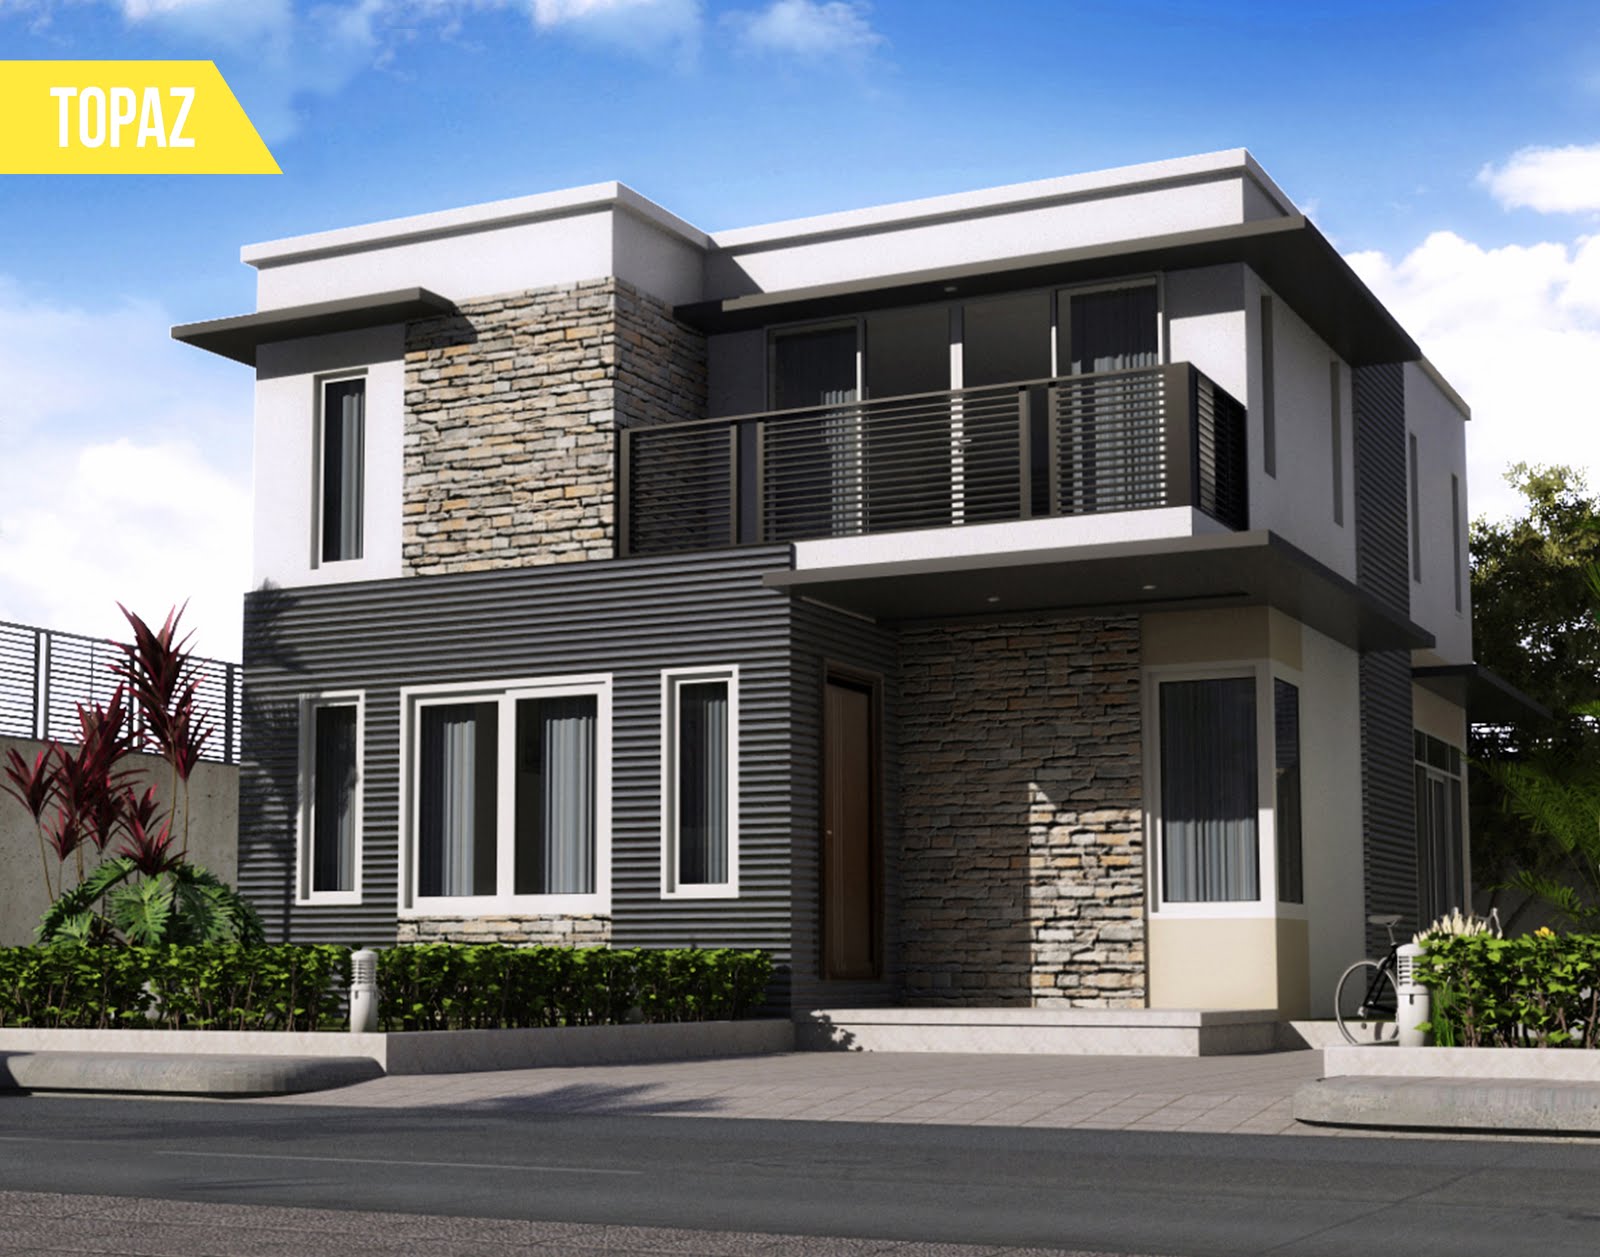 A Smart Philippine House Builder: The Number One Question You Must Ask